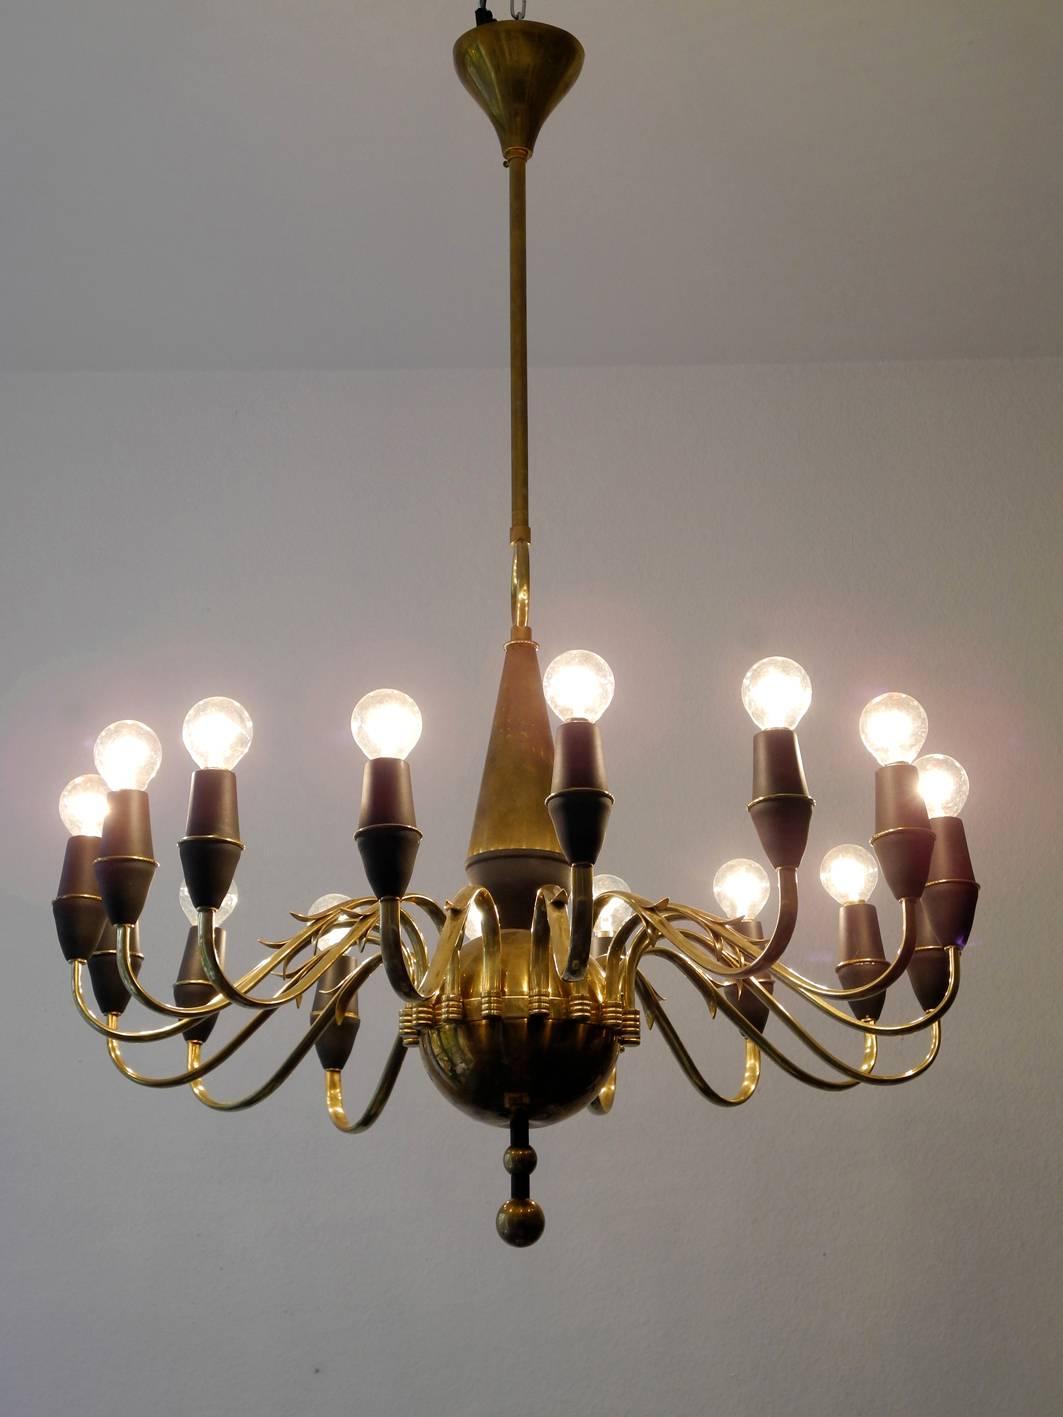 Metal Mid-Century Modern Brass Chandelier with 16 Sockets, Made in Italy For Sale